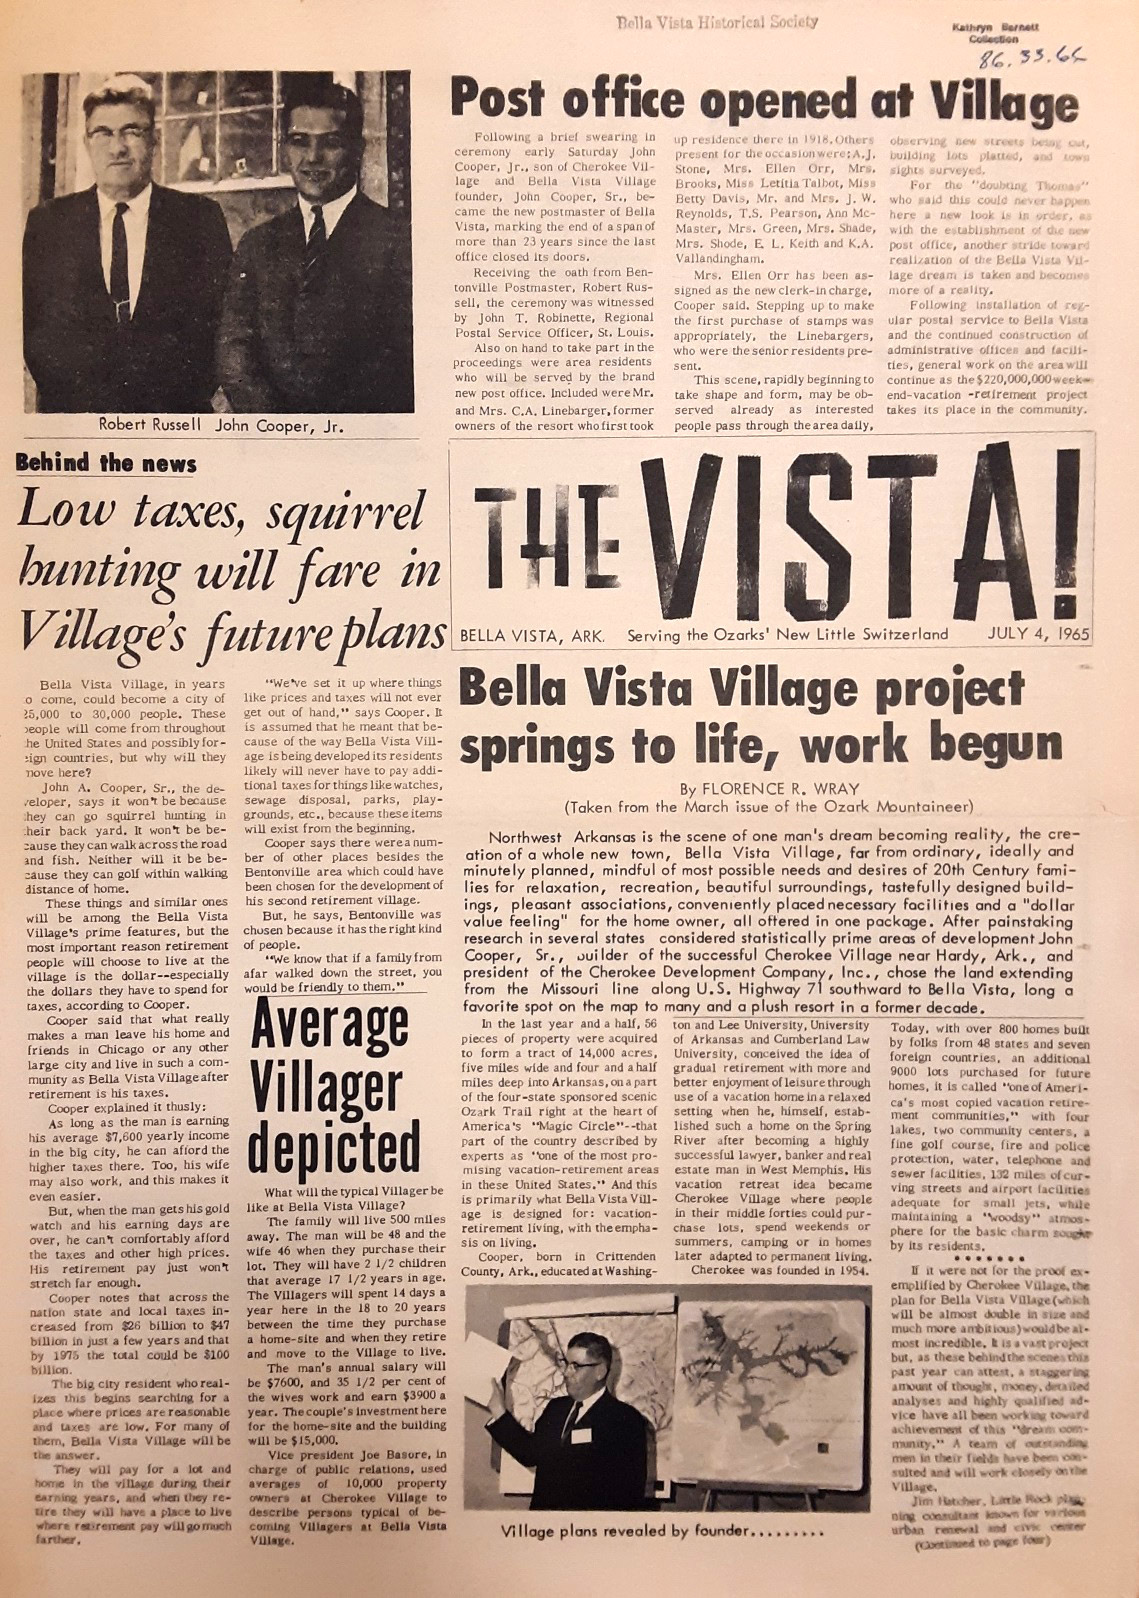 Front page of the Vista newspaper